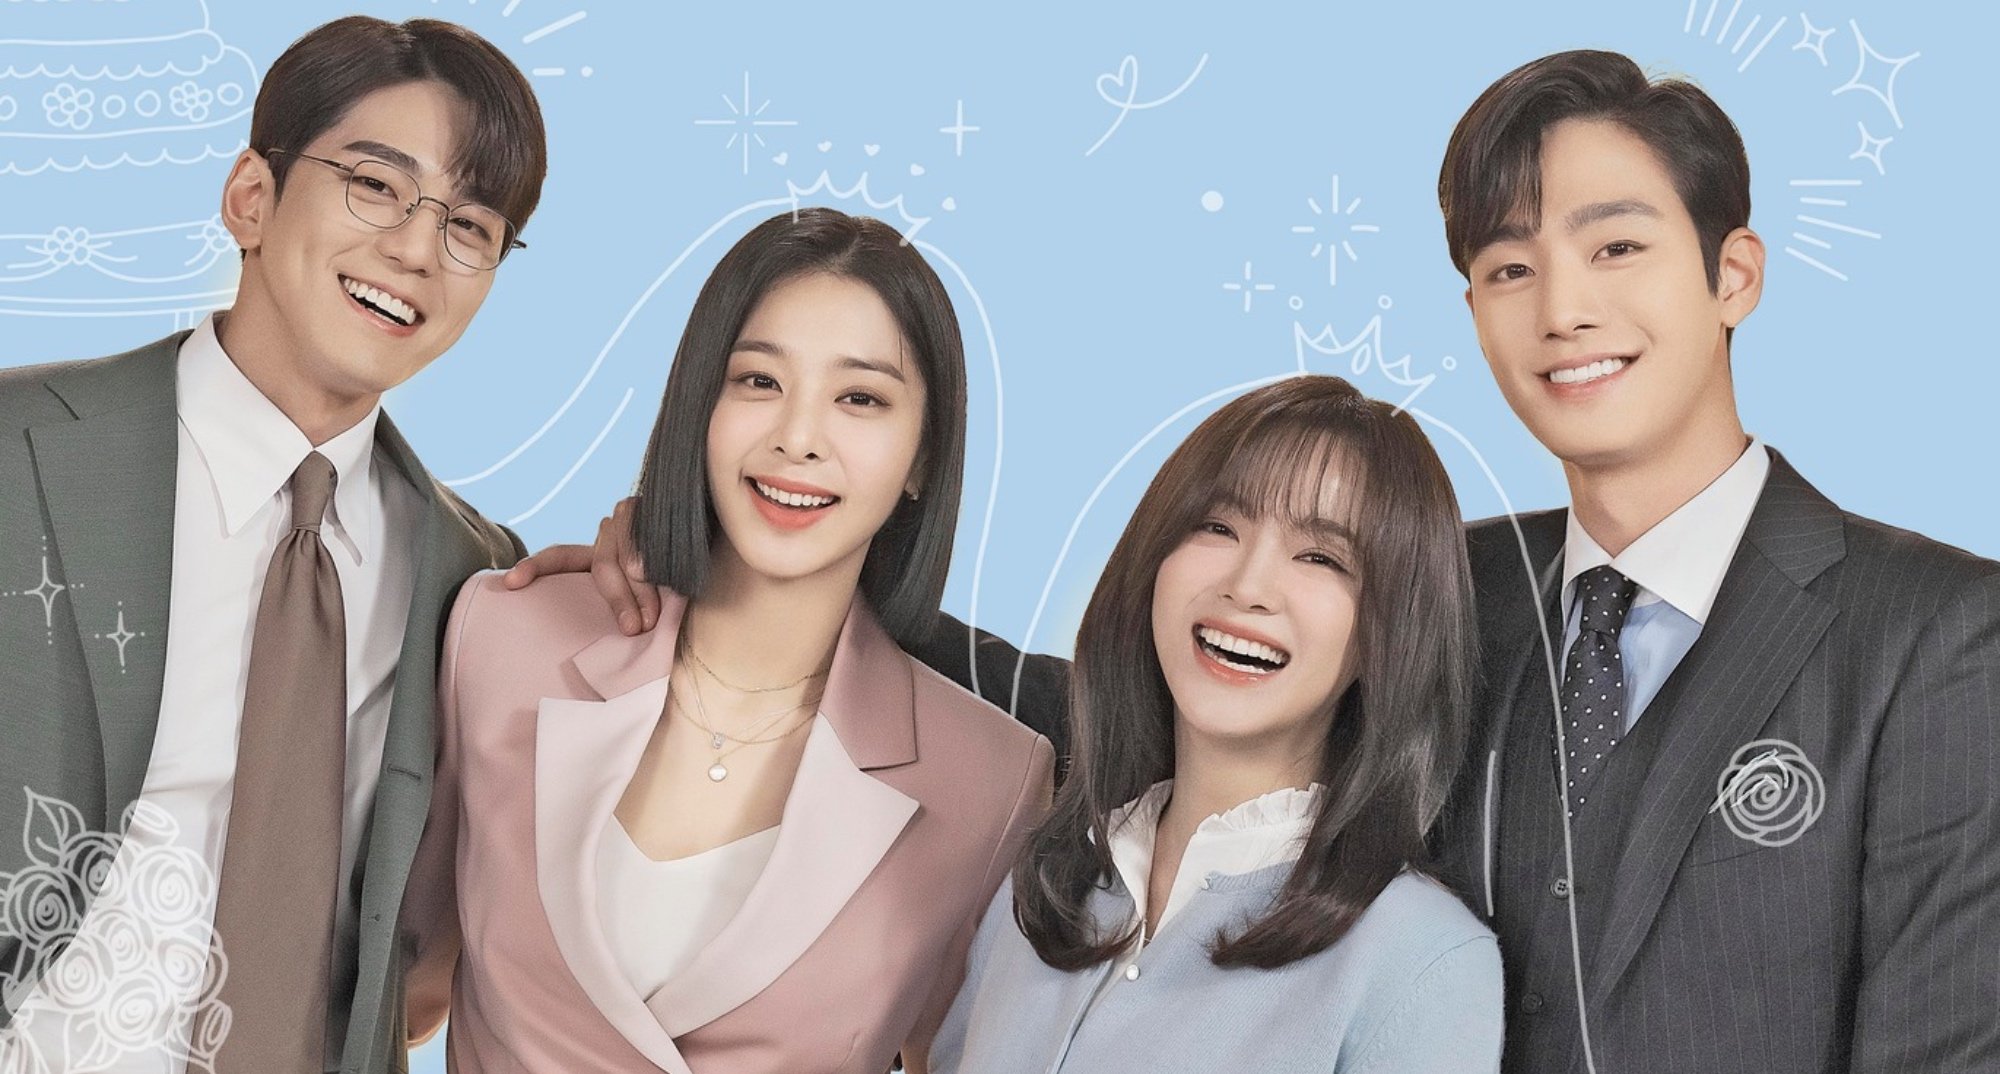 'Business Proposal' main cast smiling wearing business attire.